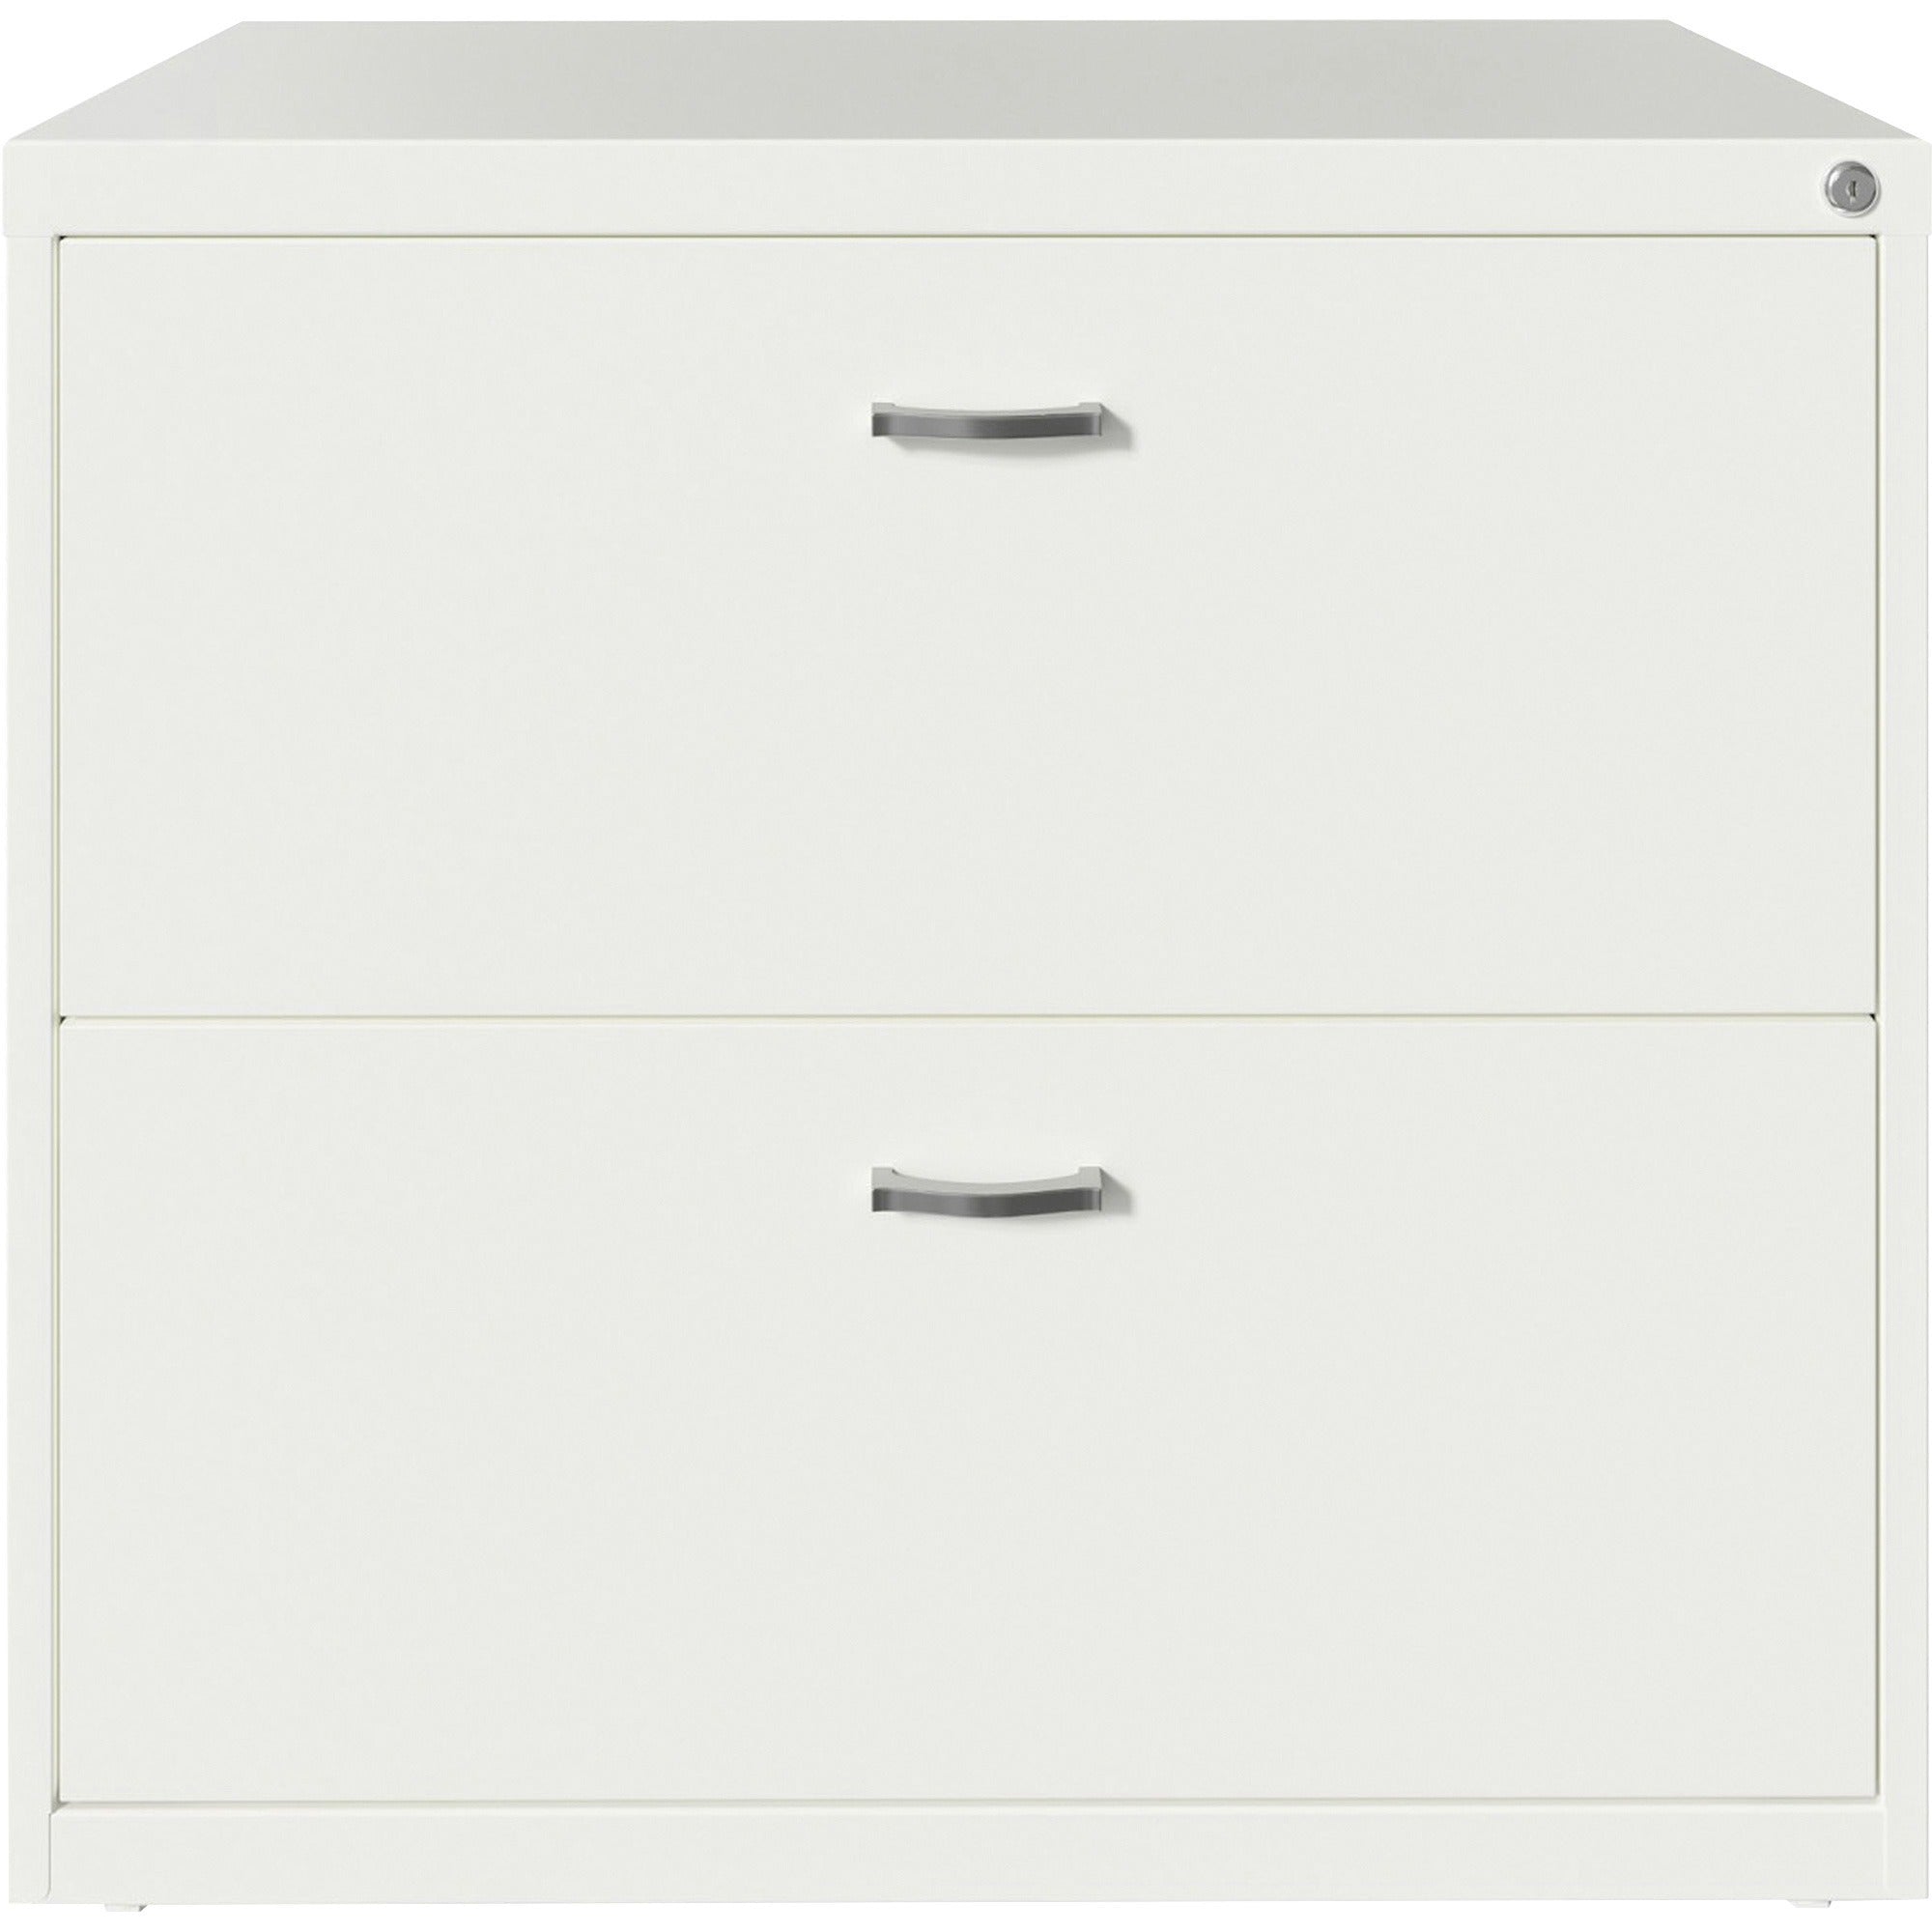 nusparc-2-drawer-lateral-file-30-x-176-x-277-2-x-drawers-for-file-letter-lateral-interlocking-anti-tip-ball-bearing-slide-ball-bearing-suspension-removable-lock-leveling-glide-adjustable-glide-durable-nonporous-surface-whit_nprlf218aawe - 2